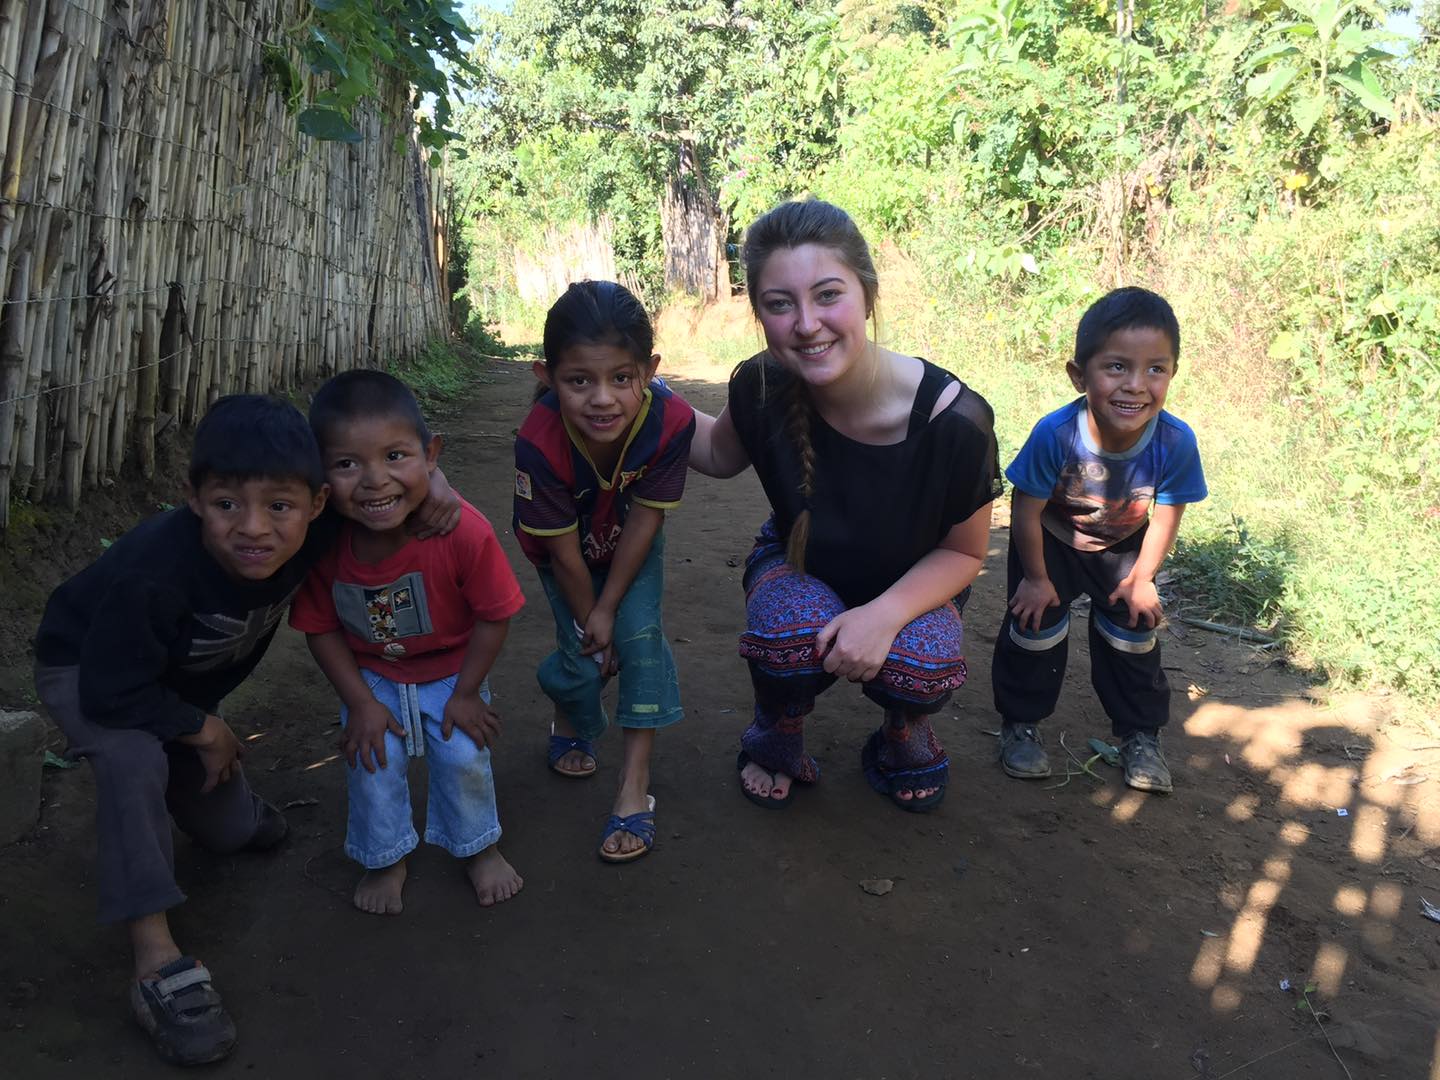 Leading children to Jesus and putting a smile on their faces makes the travel to Guatemala worth the time and money!